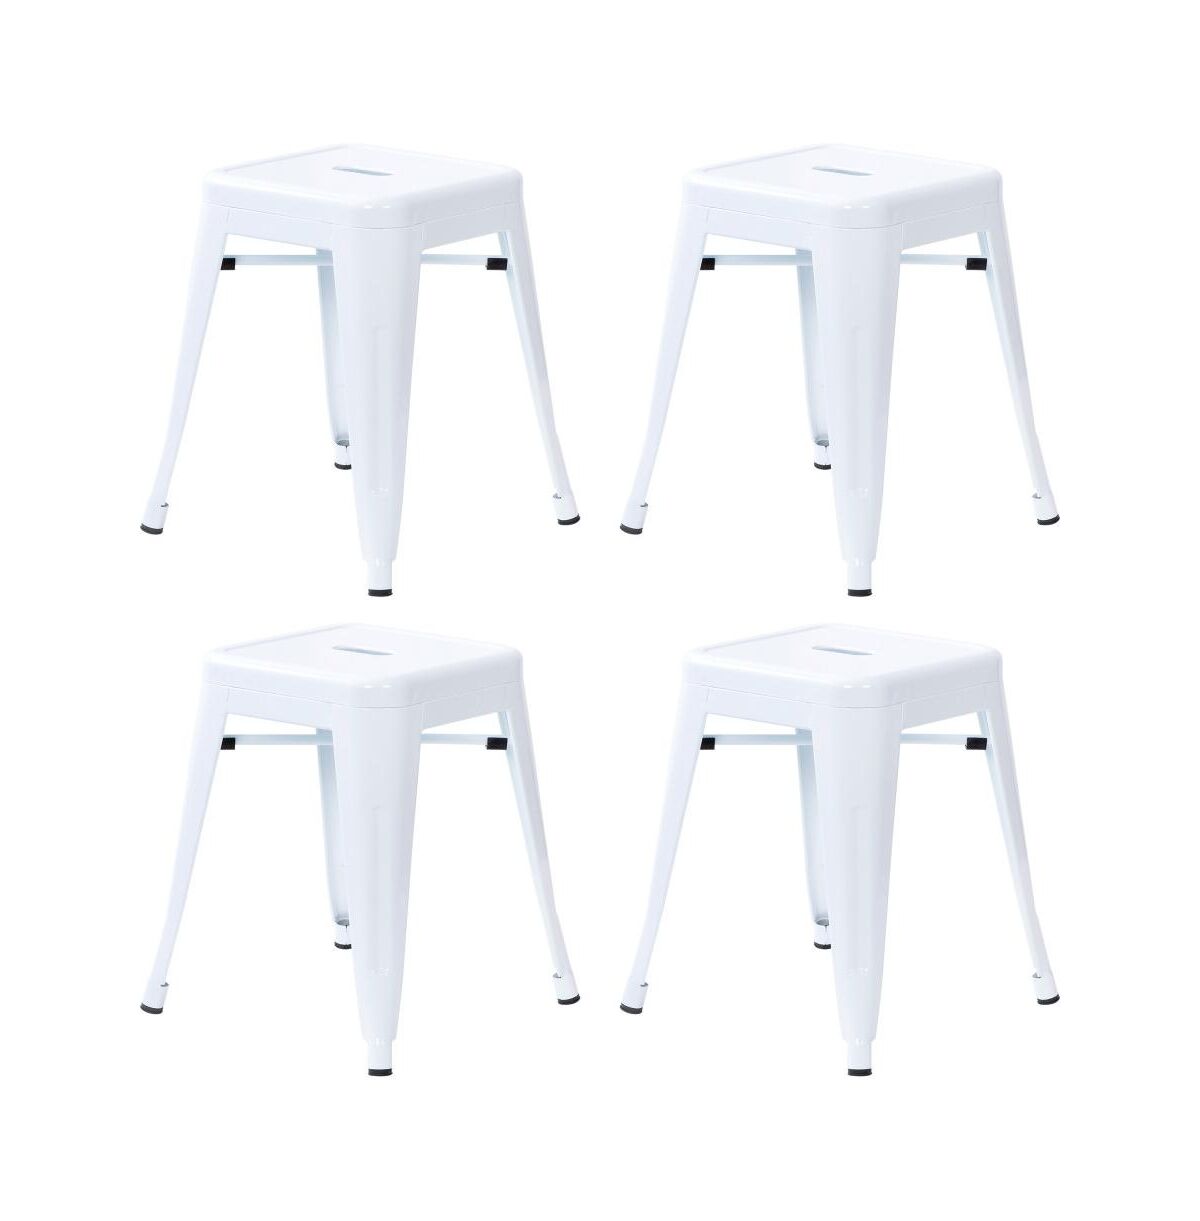 Emma+oliver 18 Inch Table Height Indoor Stackable Metal Dining Stool-Set Of 4 - White